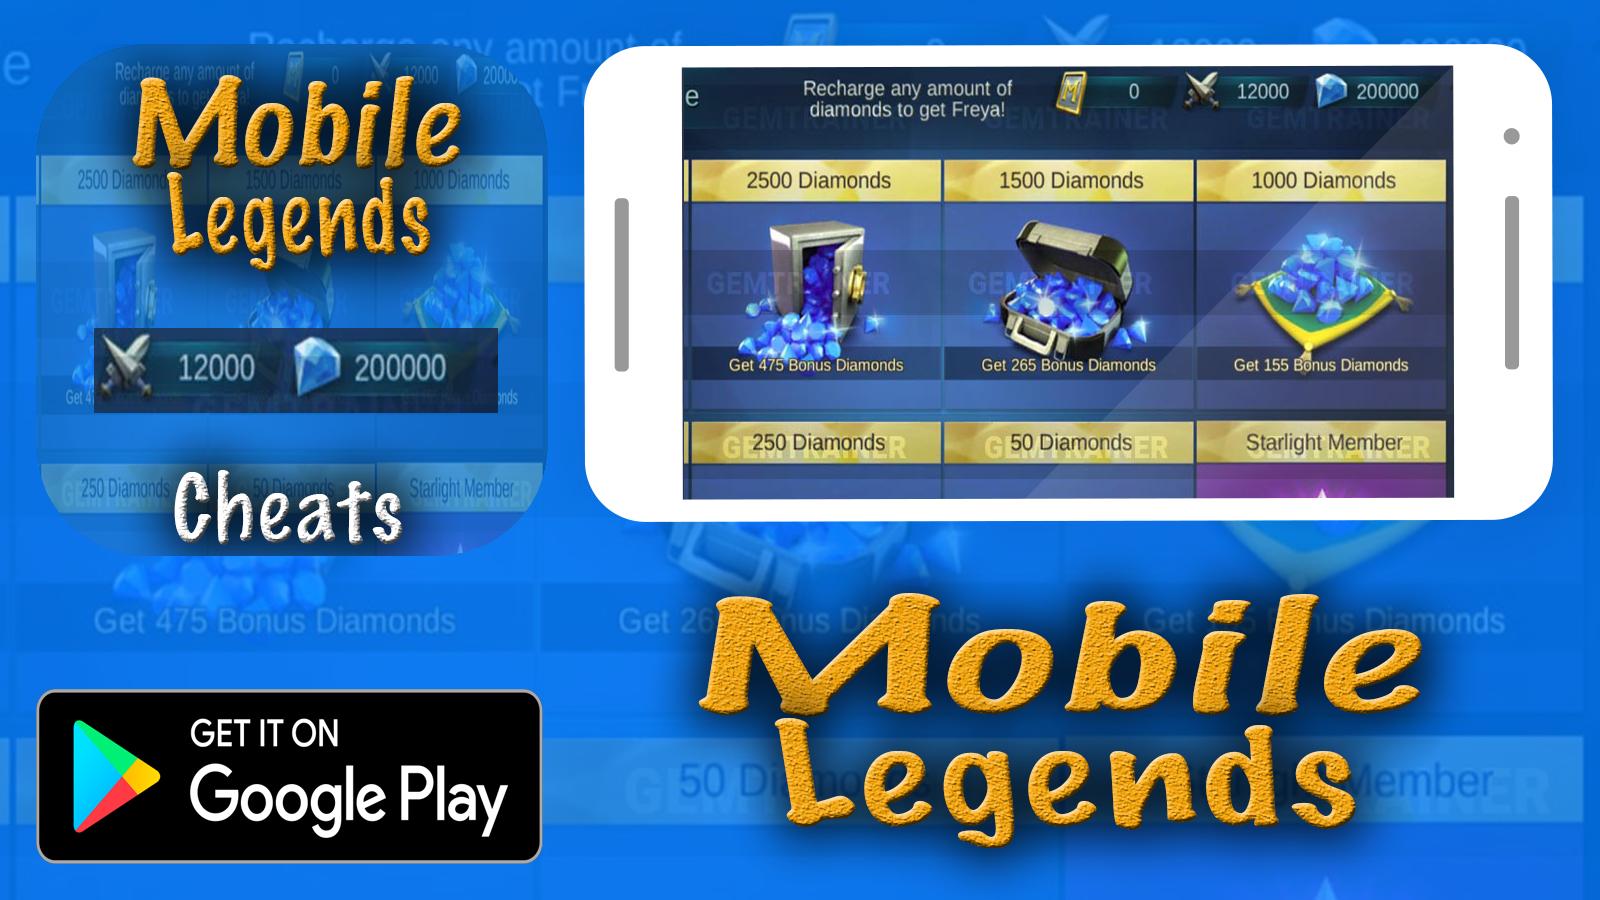 (Hack Of Official) Hackgame.Site/Ml - Mobile Legends Hack And Cheats – Free Diamonds